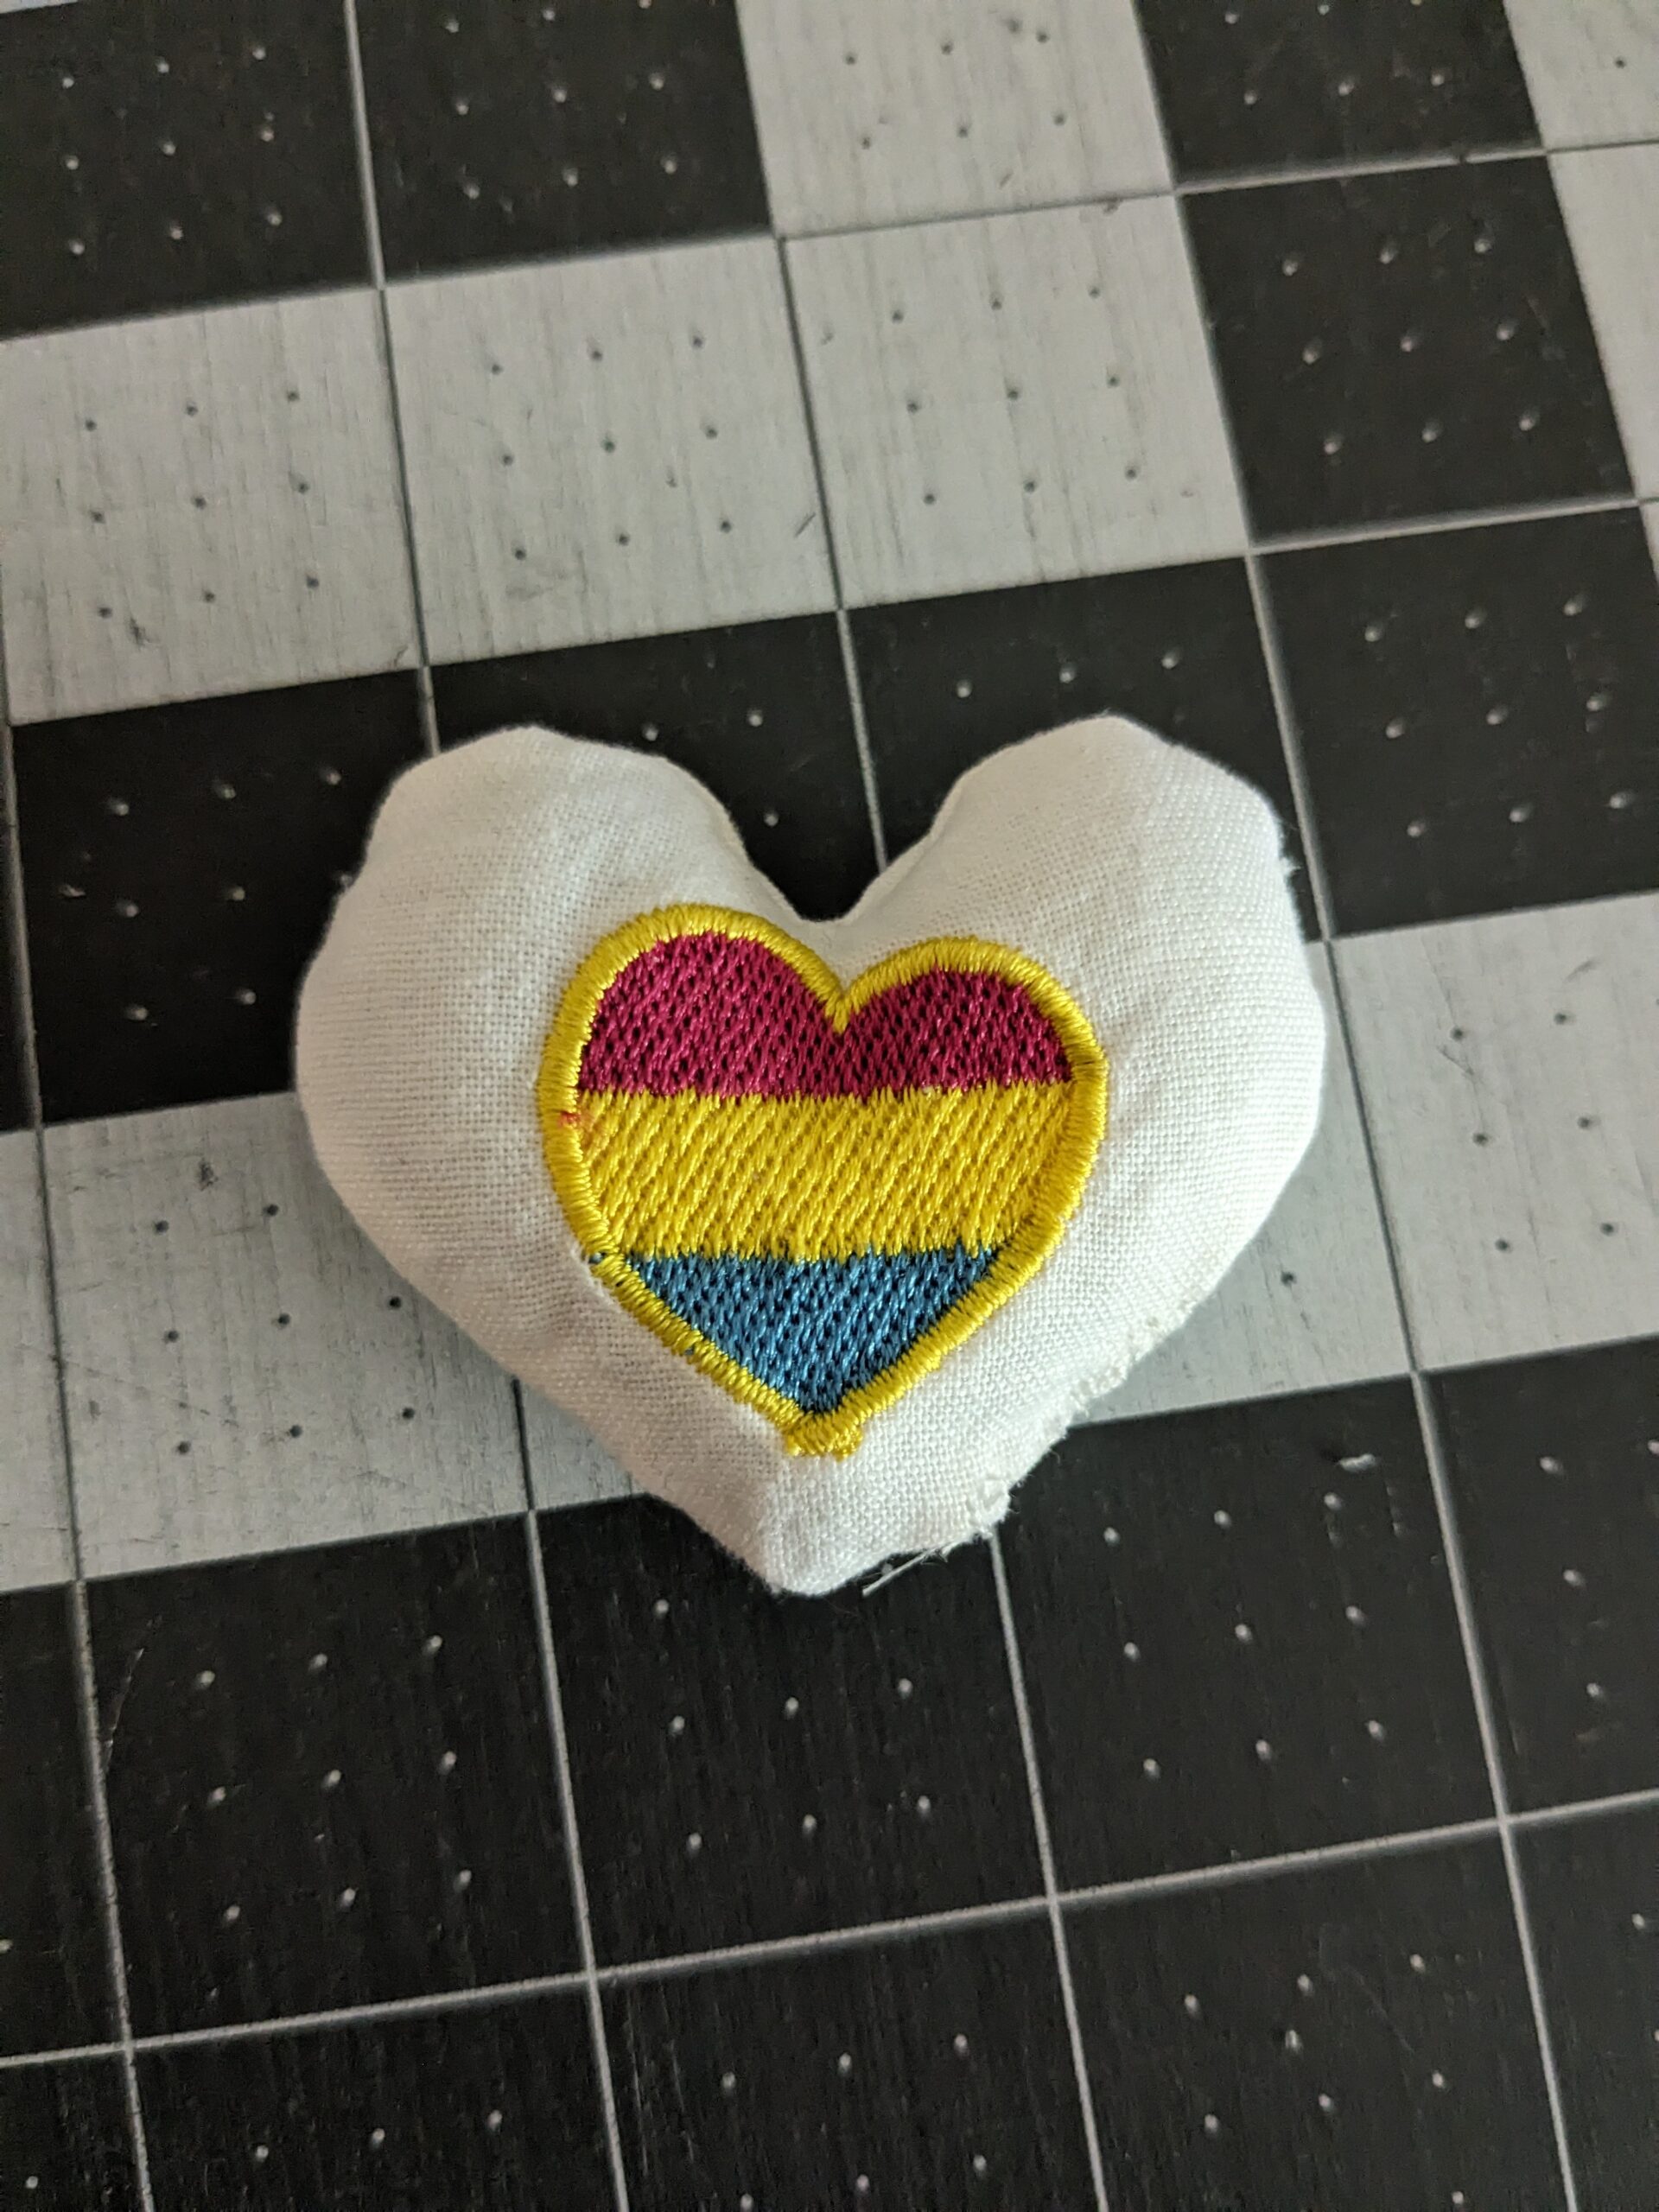 Spreading Love with Embroidered Pocket Hugs!